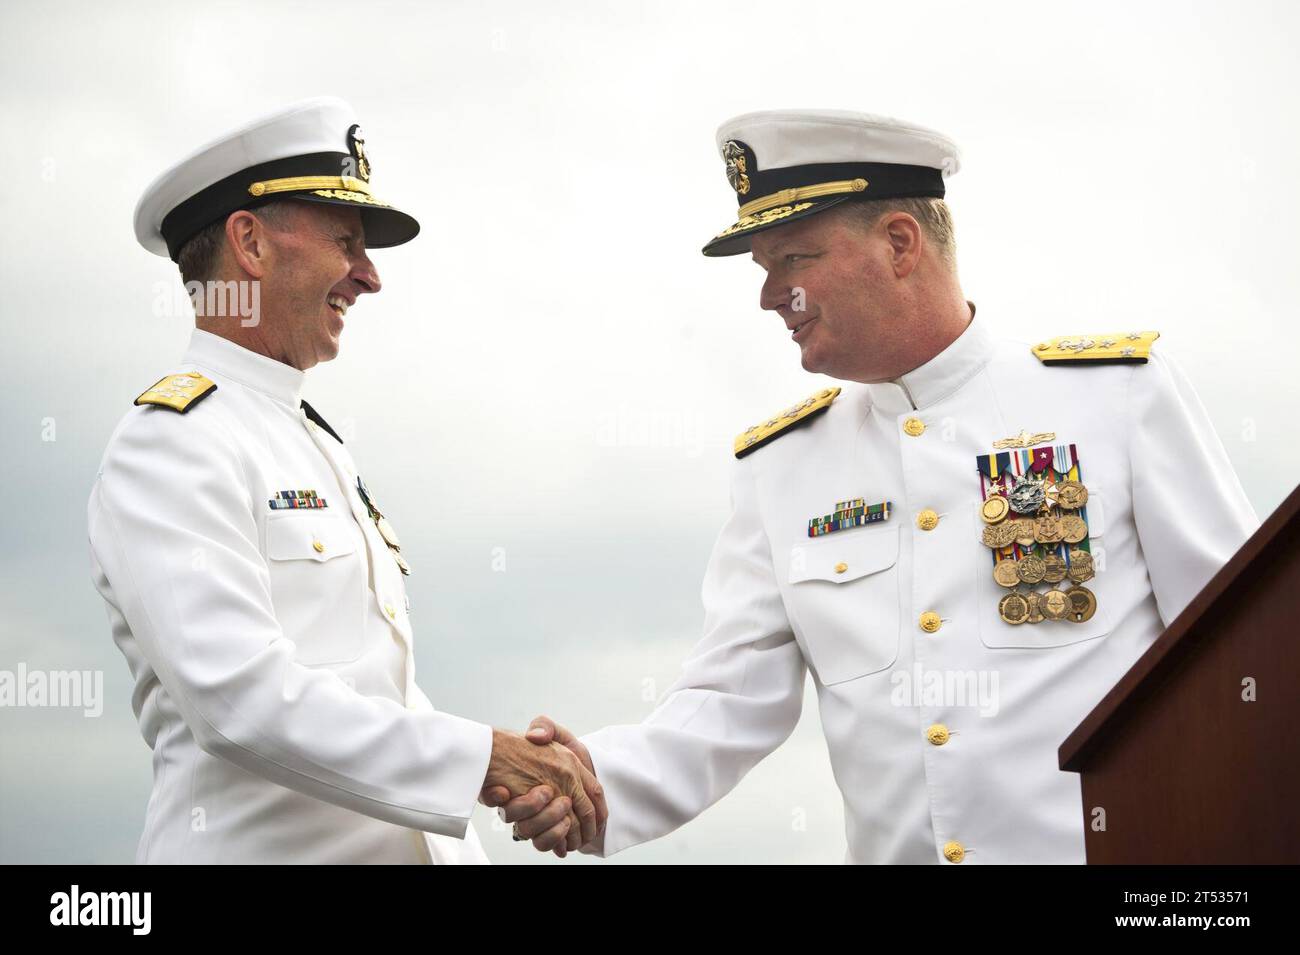 110930KK576-074 BALTIMORE (Sept. 30, 2011) Chief of Naval Operations (CNO) Adm. Jonathan W. Greenert, left, congratulates Vice Adm. Barry McCullough during a change of command ceremony at Fort McHenry National Monument. Vice Adm. Michael S. Rogers relieved McCullough as commander of U.S. Fleet Cyber Command and U.S. 10th Fleet. Fleet Cyber Command is the Navy's central operating authority for networks, cryptologic and signals intelligence, information operations, cyber, electronic warfare, and space capabilities. Stock Photo